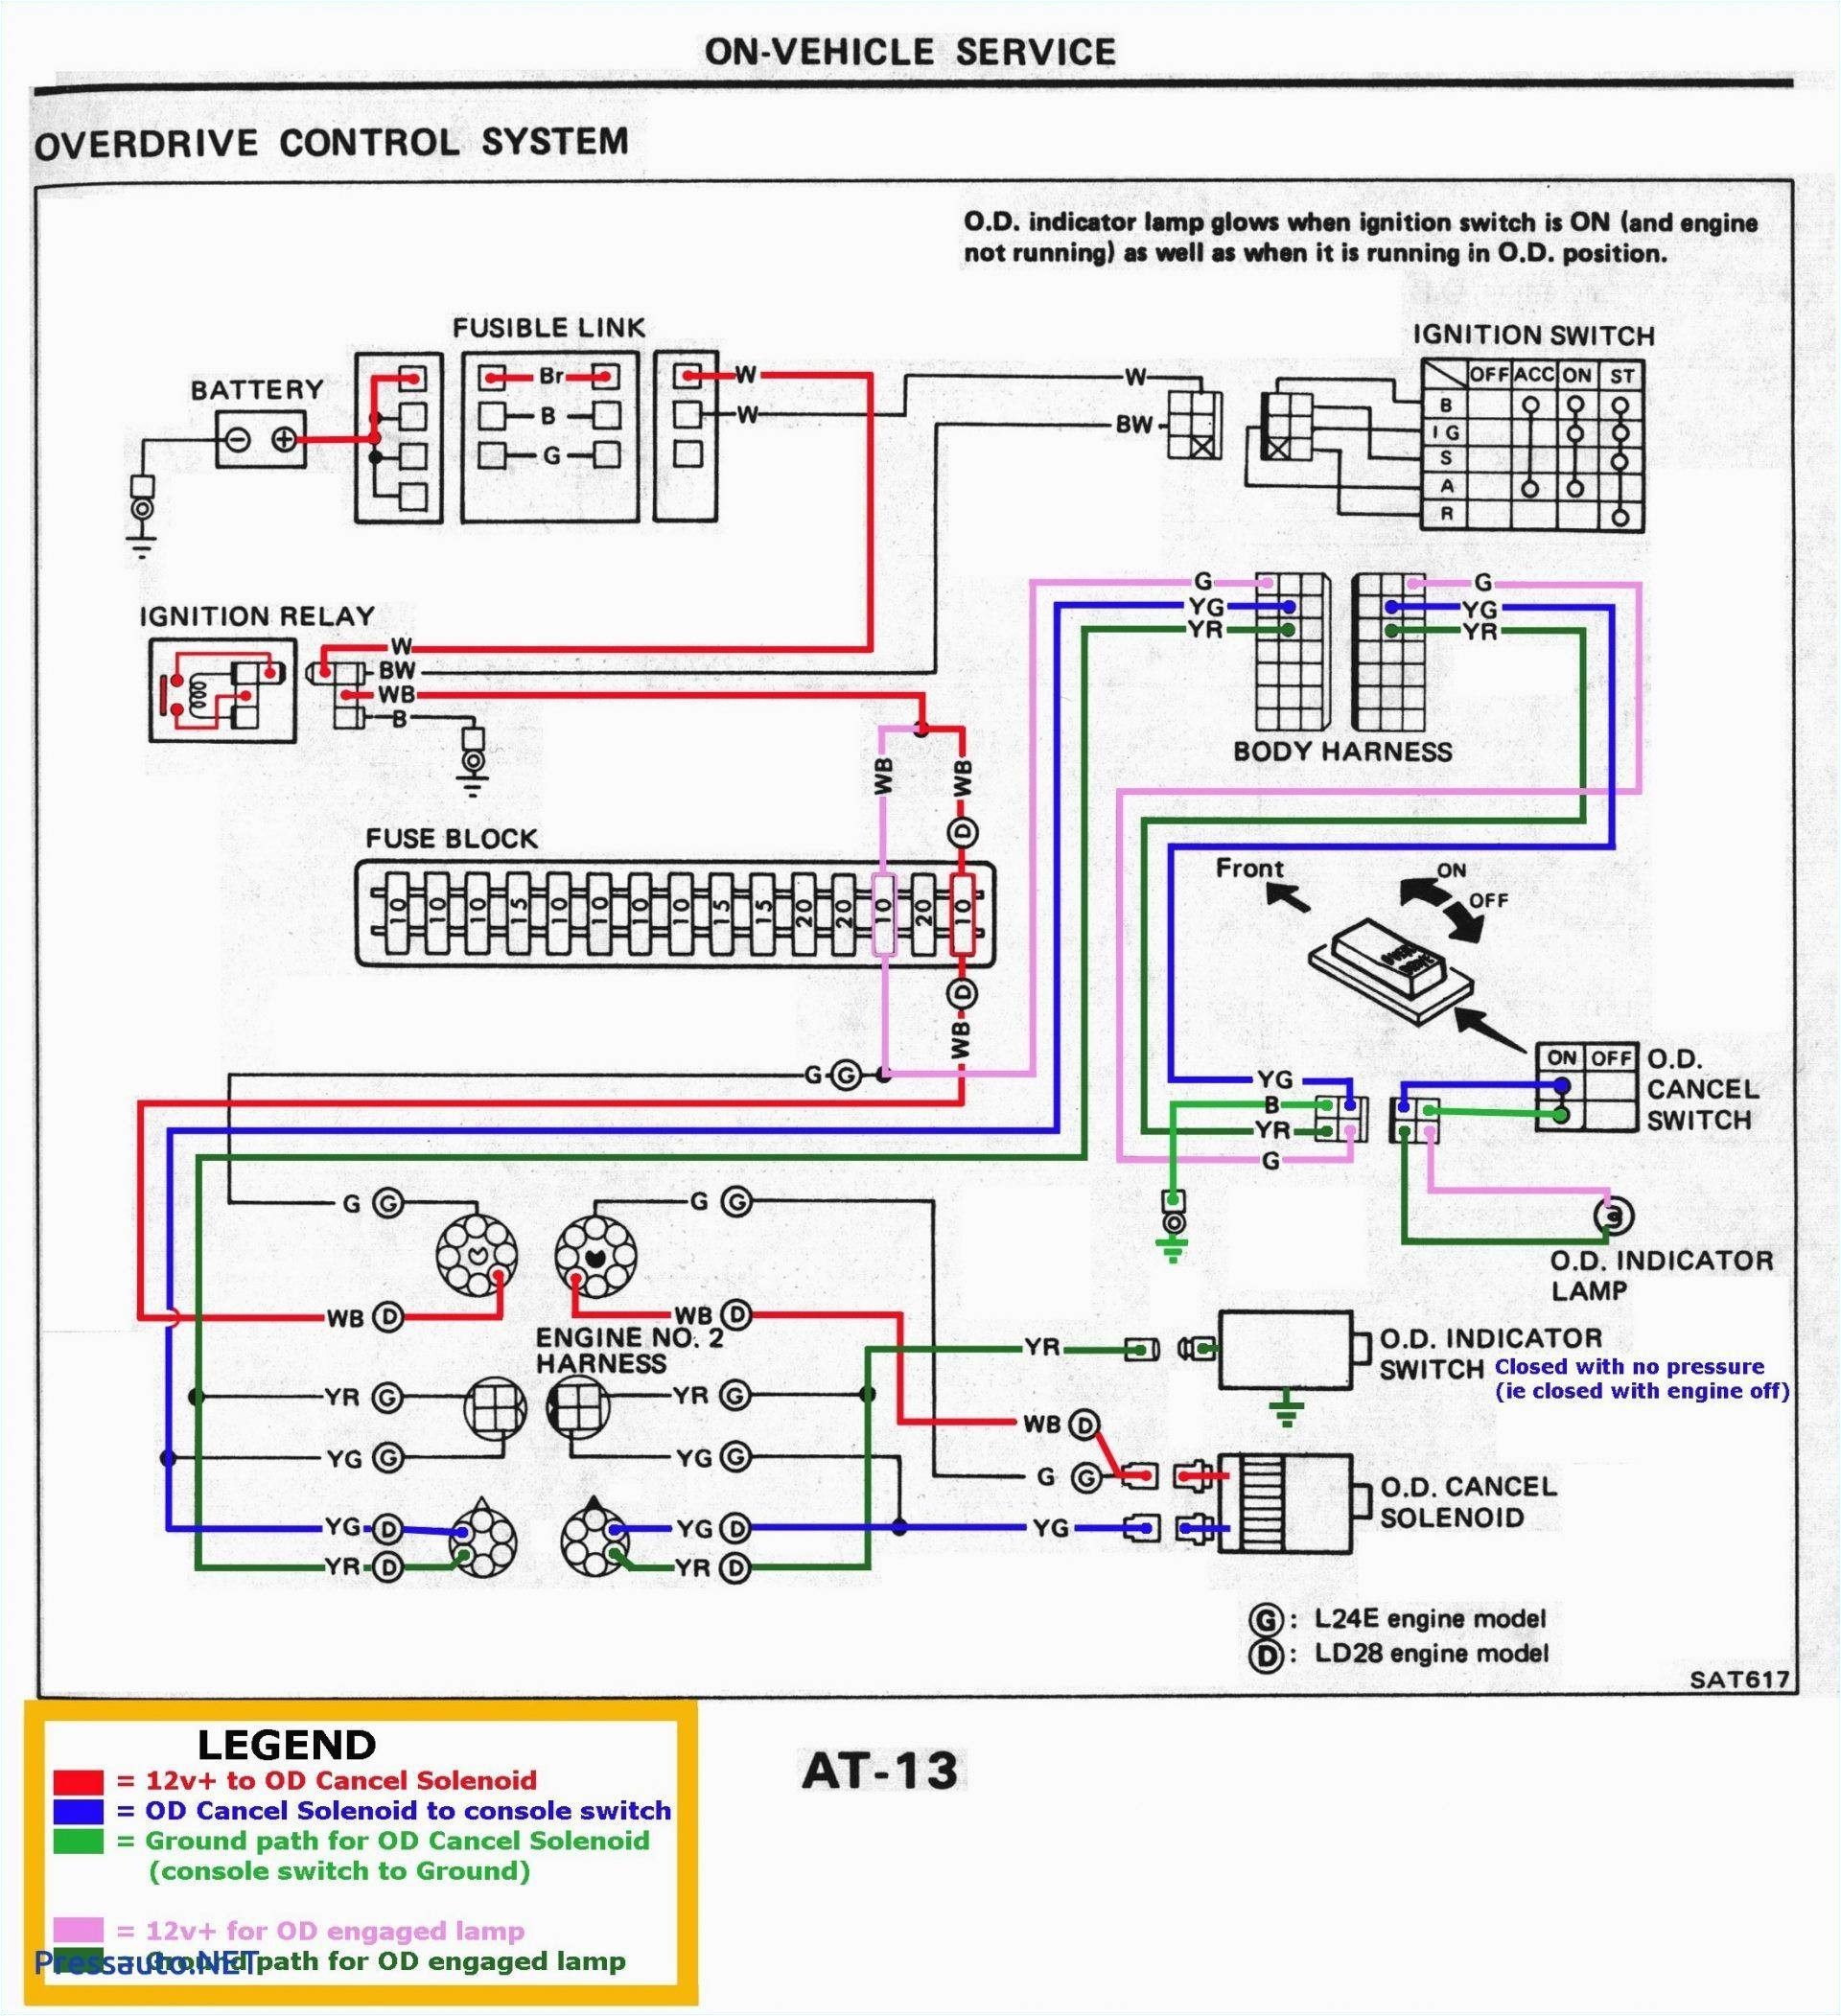 chevy tpi wiring diagram wiring diagram operations 87 tpi maf sensor wiring moreover 1985 iroc 305